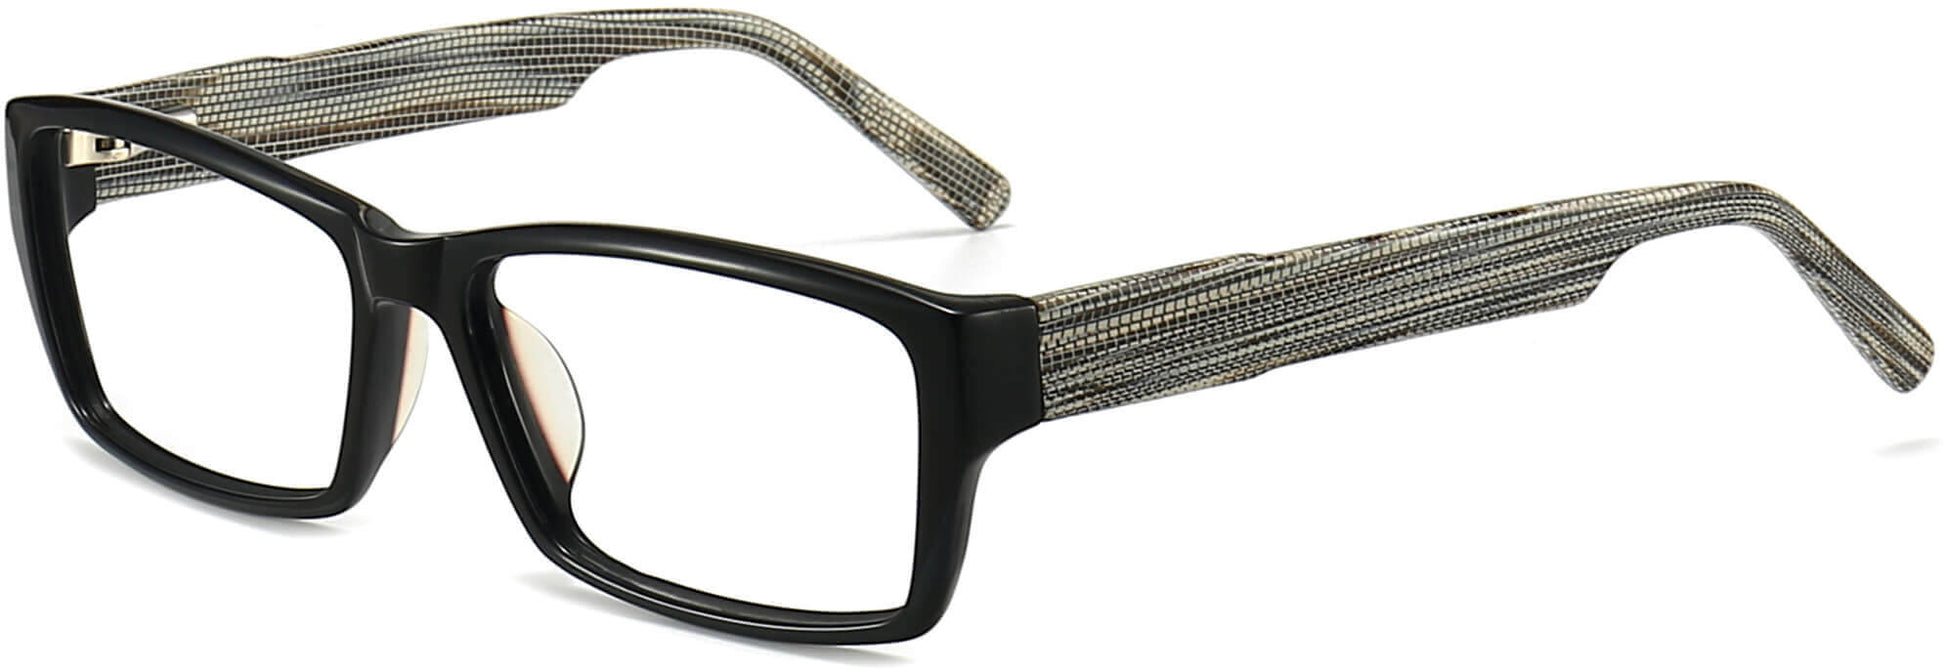 Moises Rectangle Black Eyeglasses from ANRRI, angle view